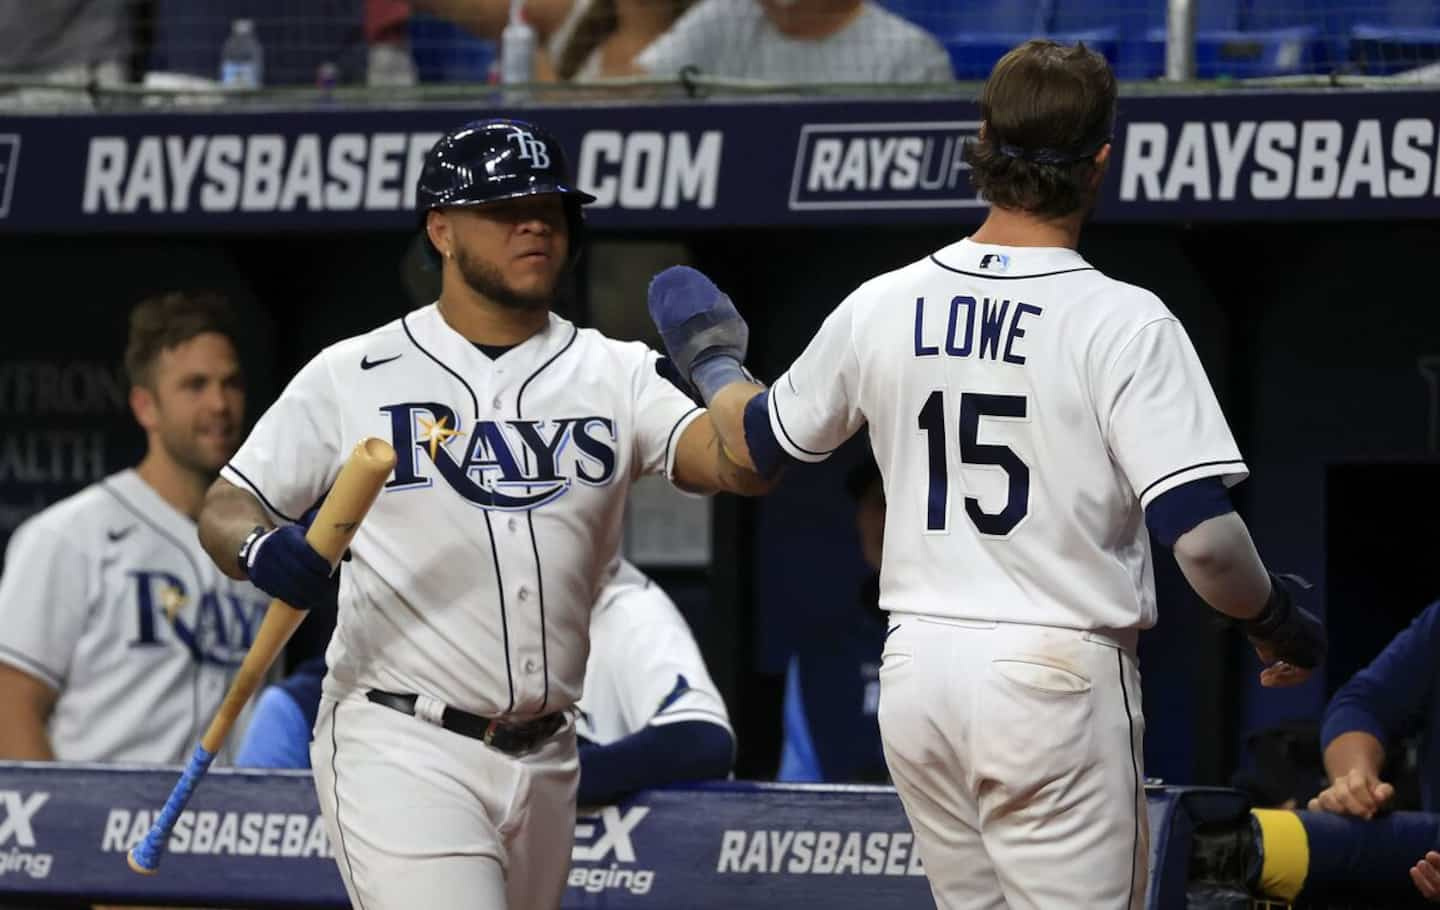 The Rays have the Red Sox number